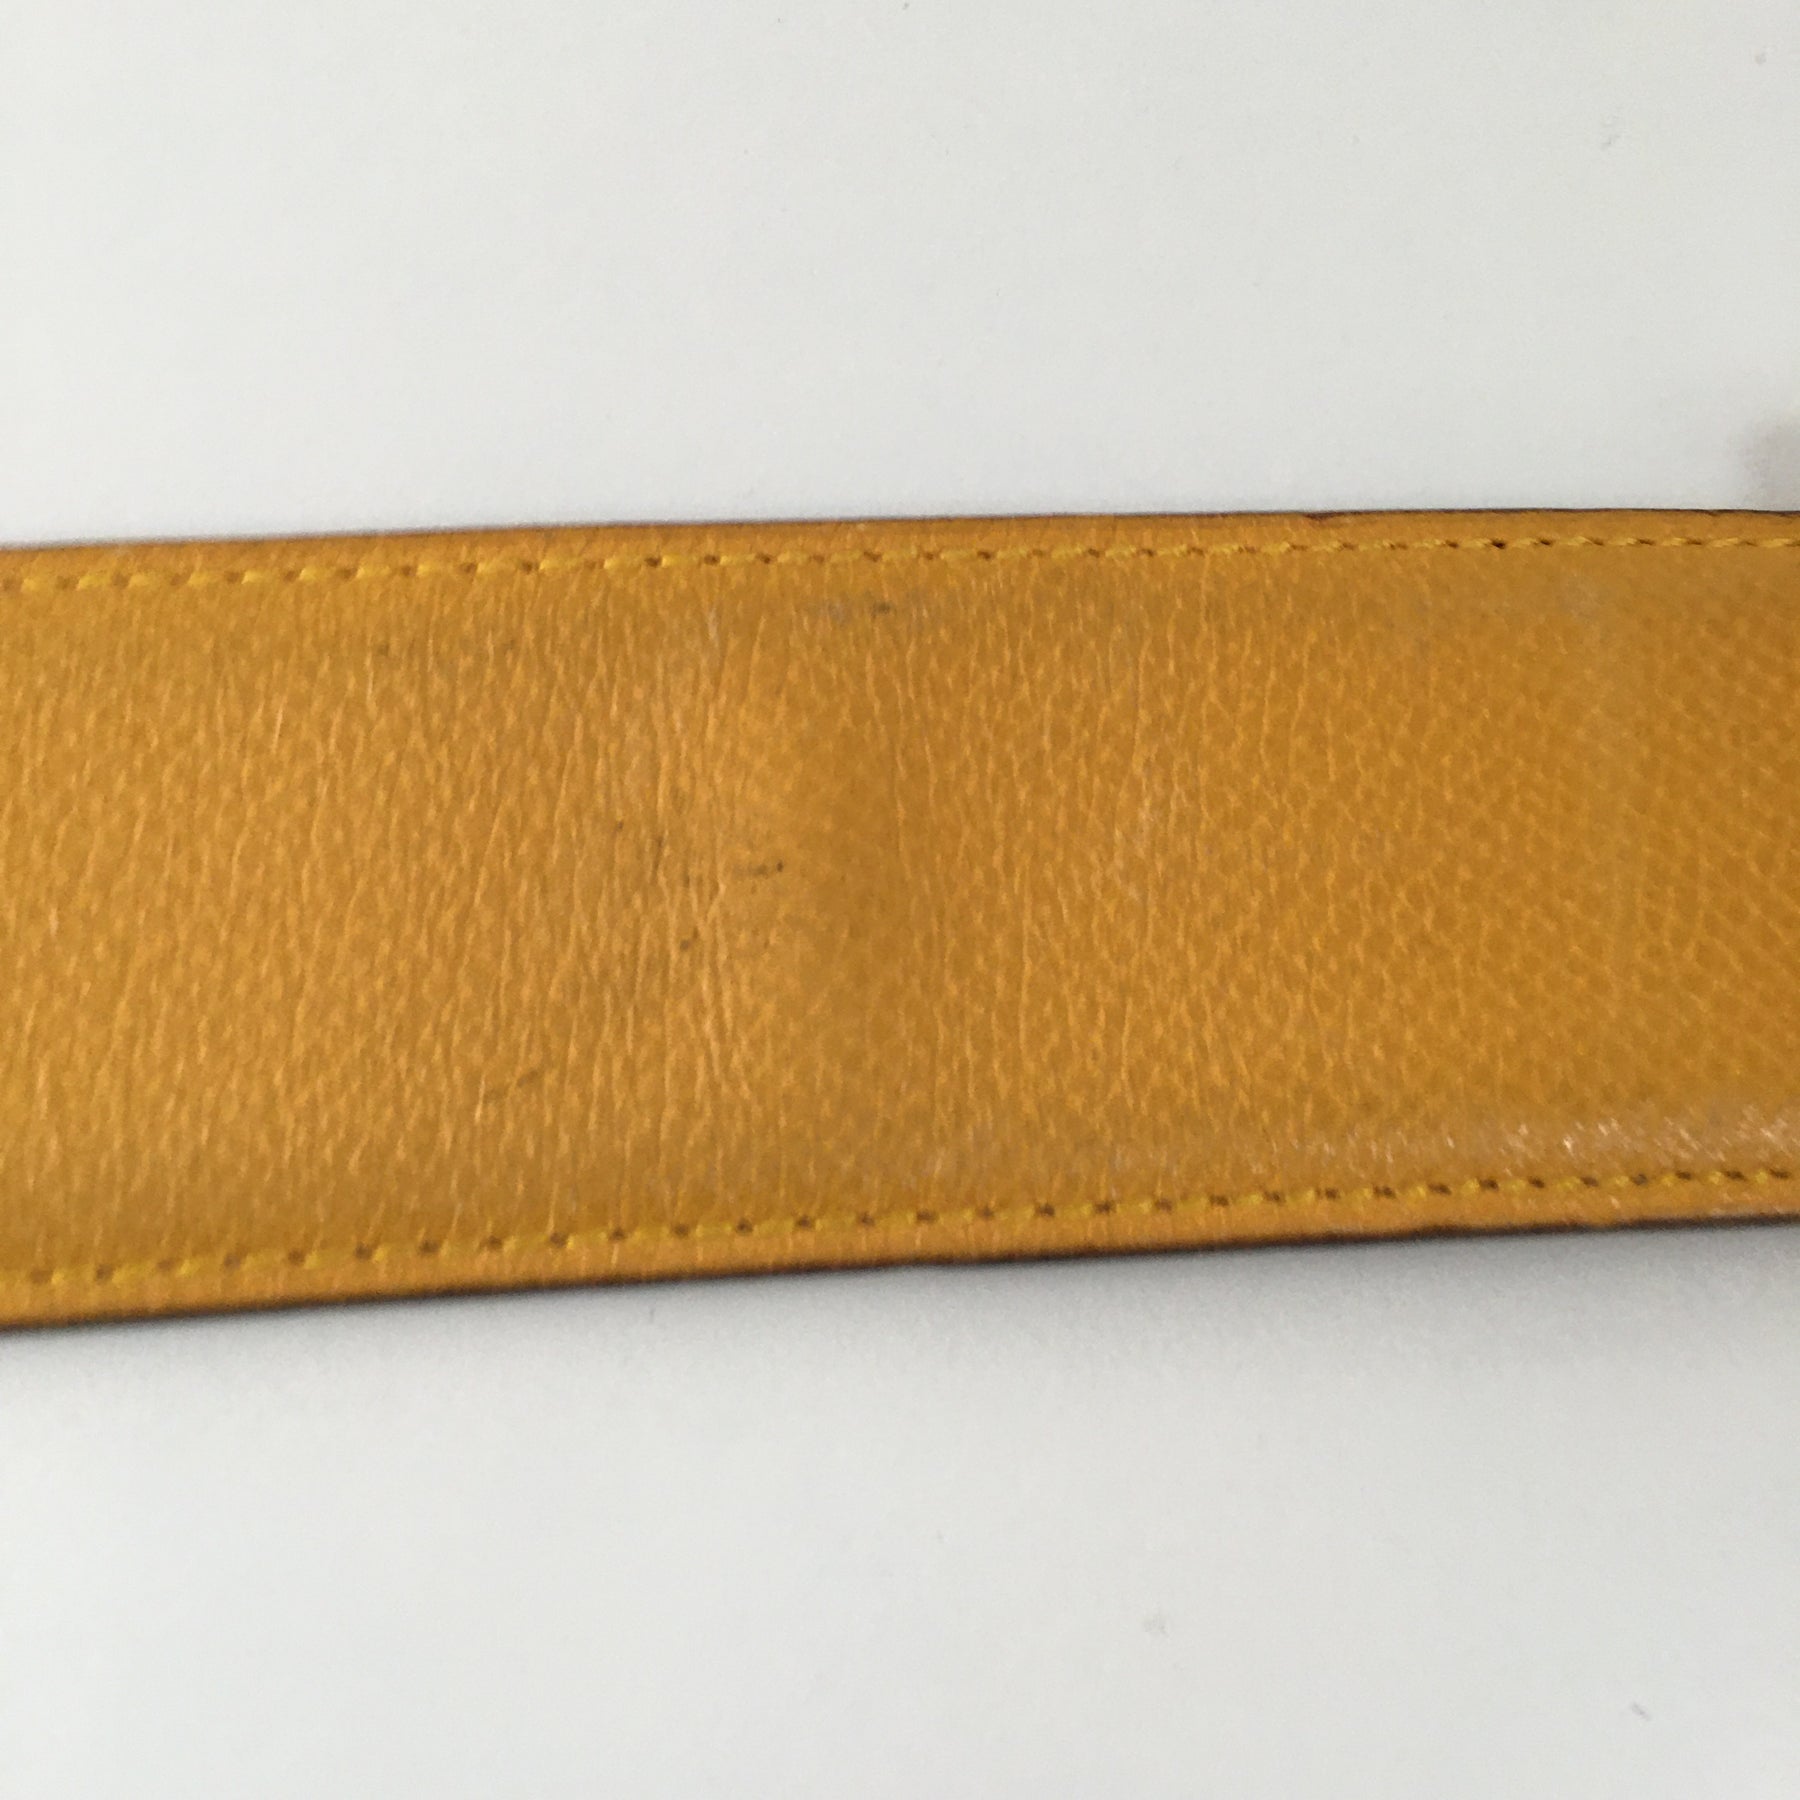 Hermès - Authenticated Collier de Chien Belt - Leather Red for Women, Very Good Condition